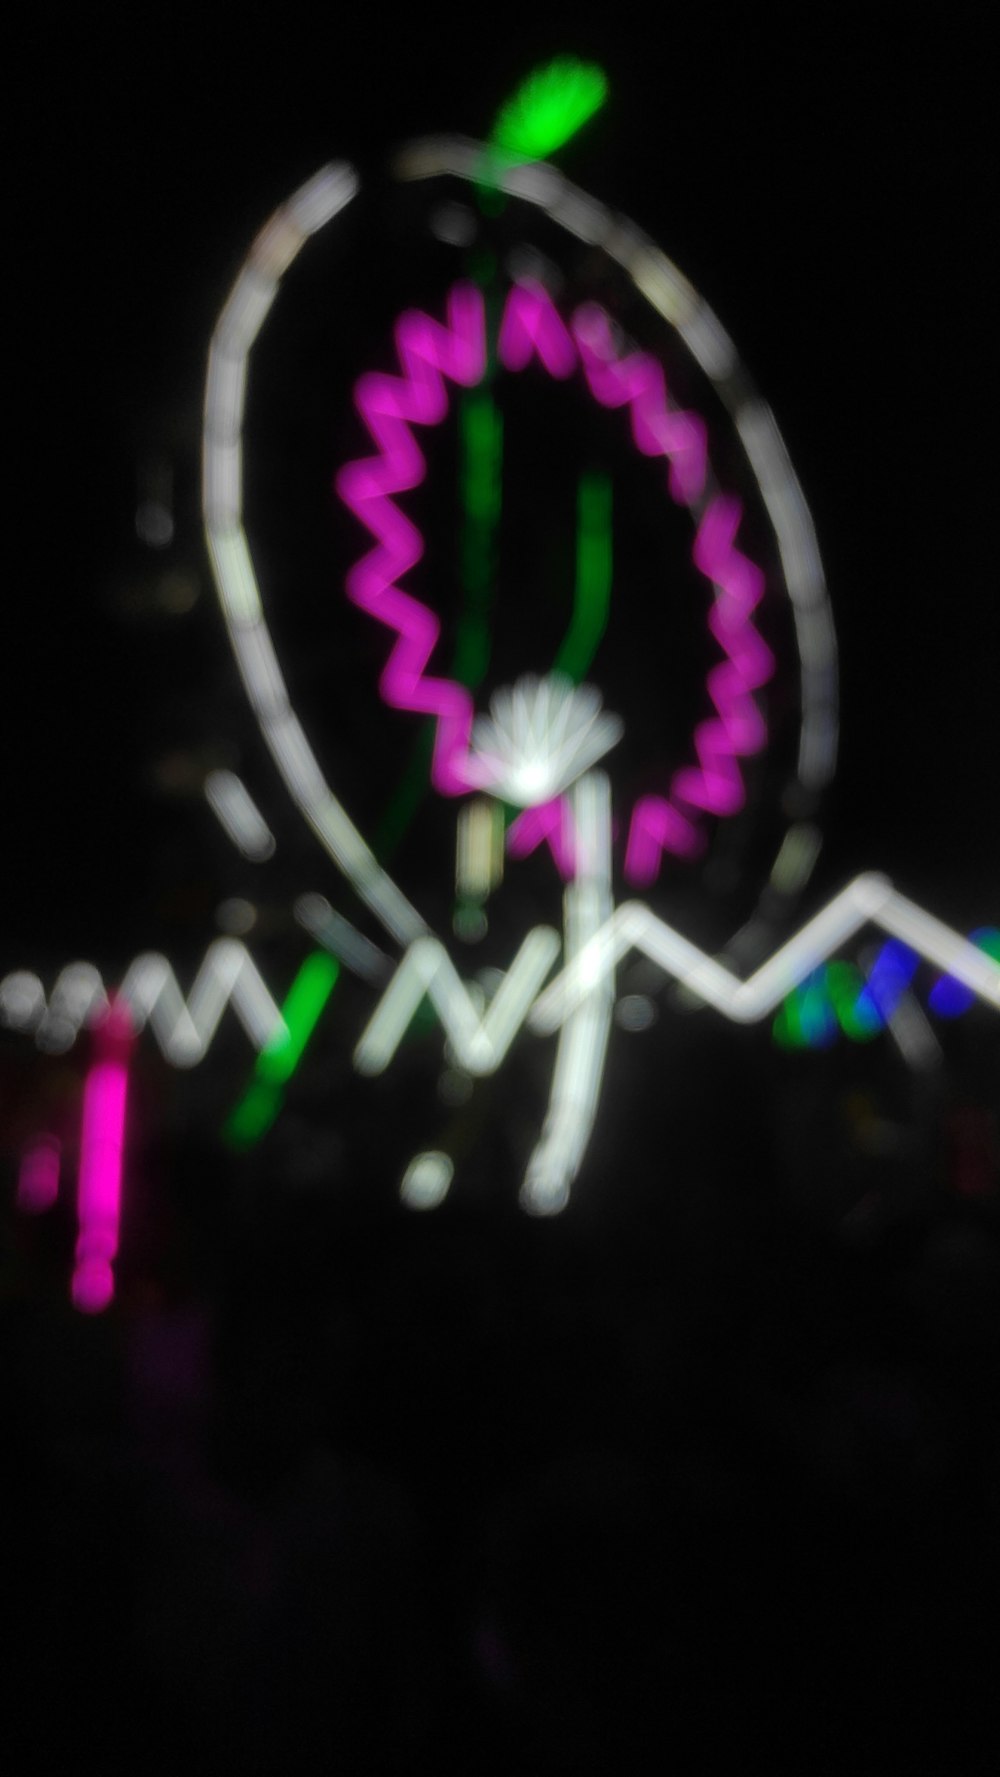 a blurry photo of a ferris wheel at night